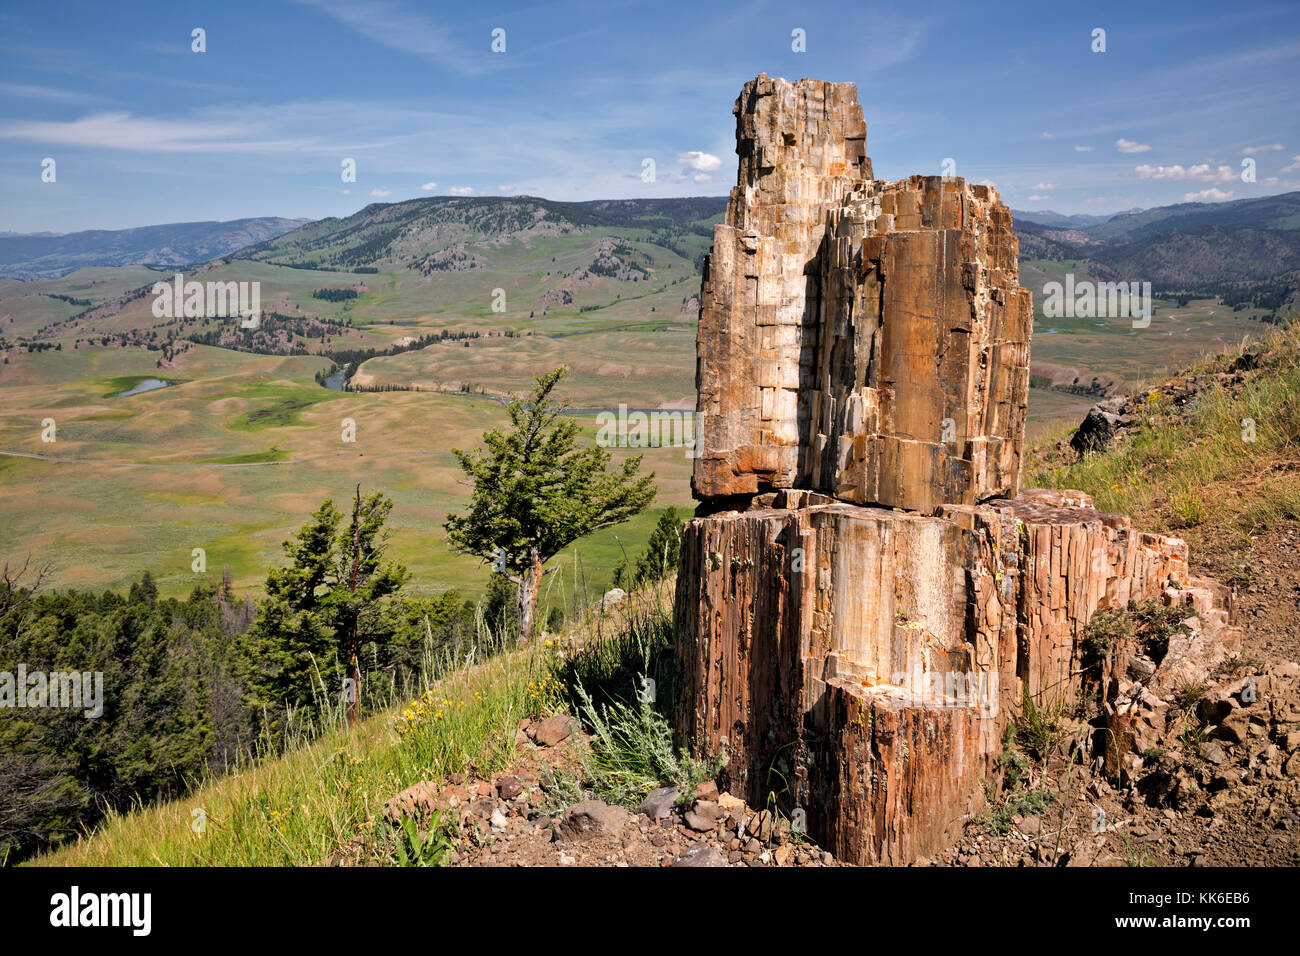 WY02688-00...WYOMING - A section of a petrified tree viewed on the Petrified Trees trail while over looking the Lamar Valley in Yellowstone National P Stock Photo